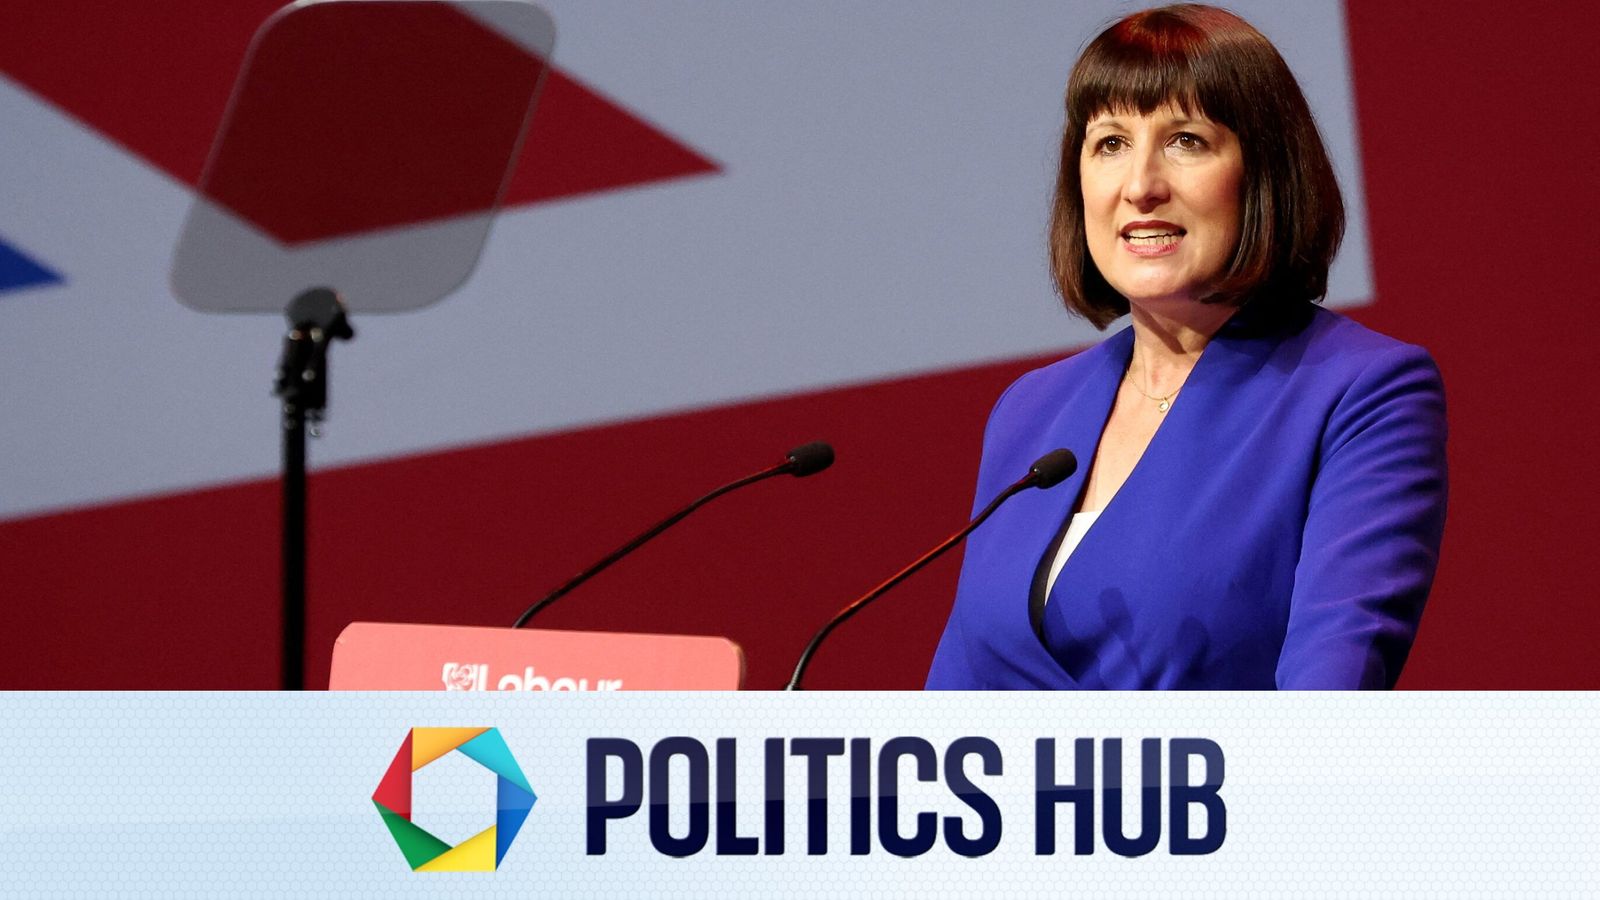 Labour conference latest: Shadow chancellor to make major speech in Liverpool – as Labour focuses on the economy | Politics News